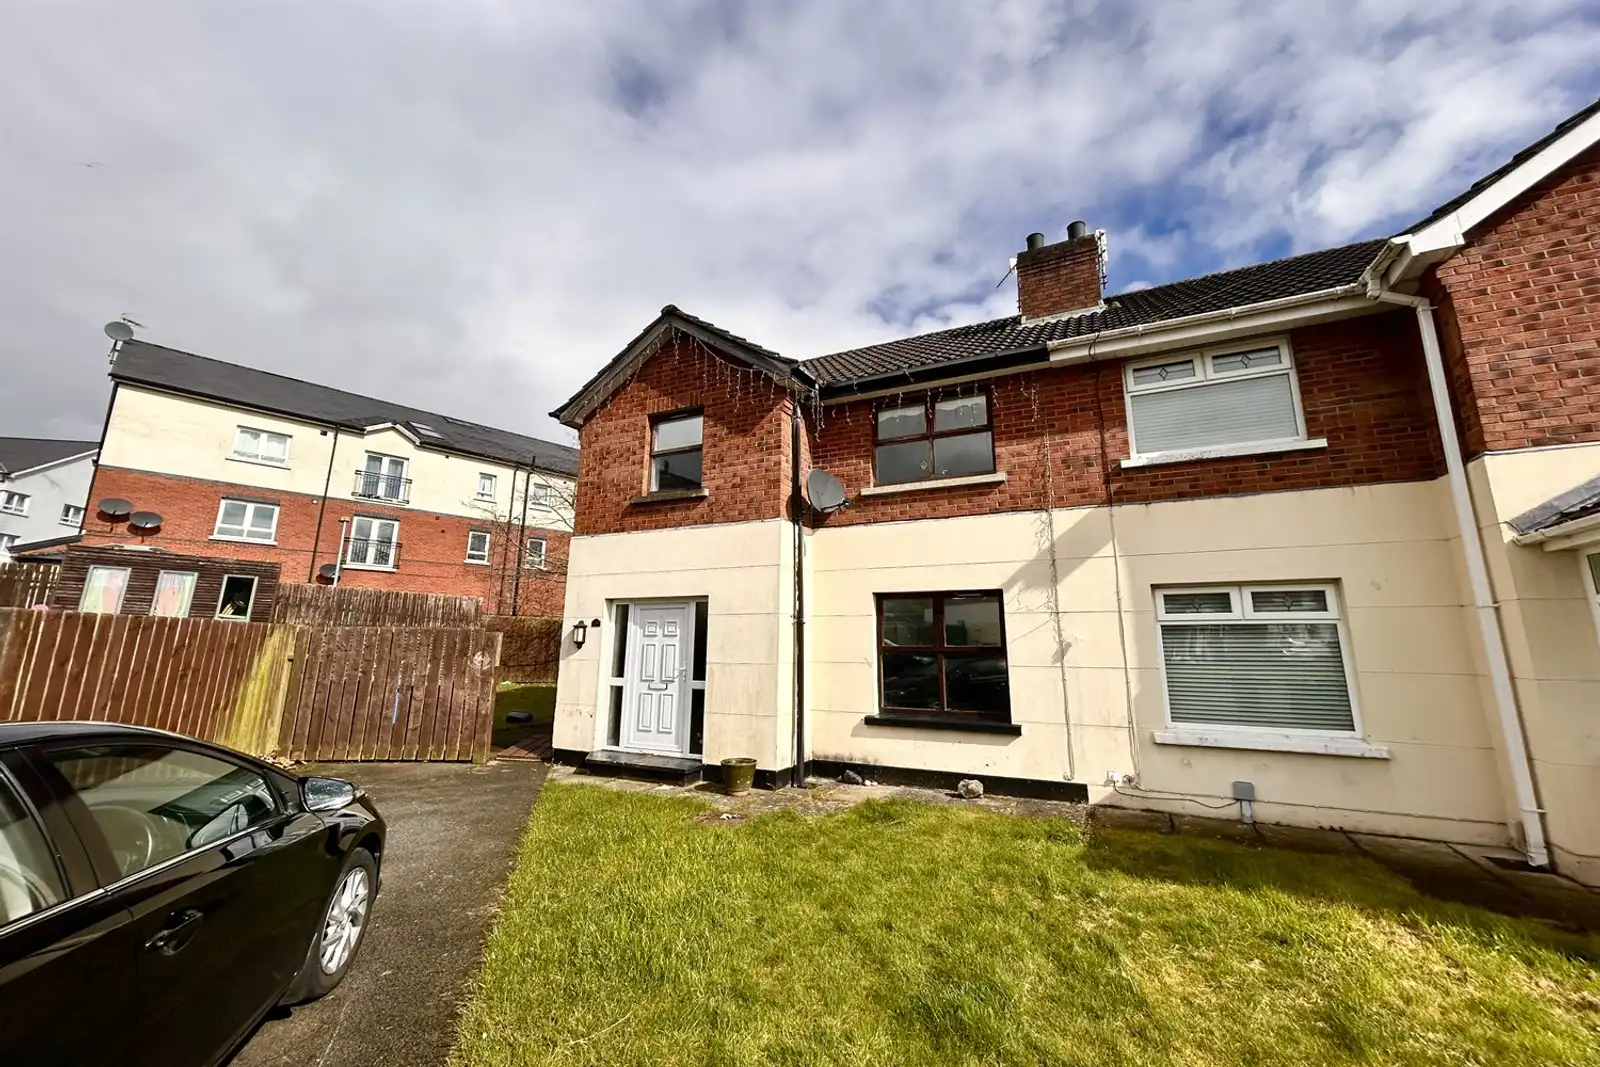 29 Old Throne Park, Whitewell Road, Newtownabbey